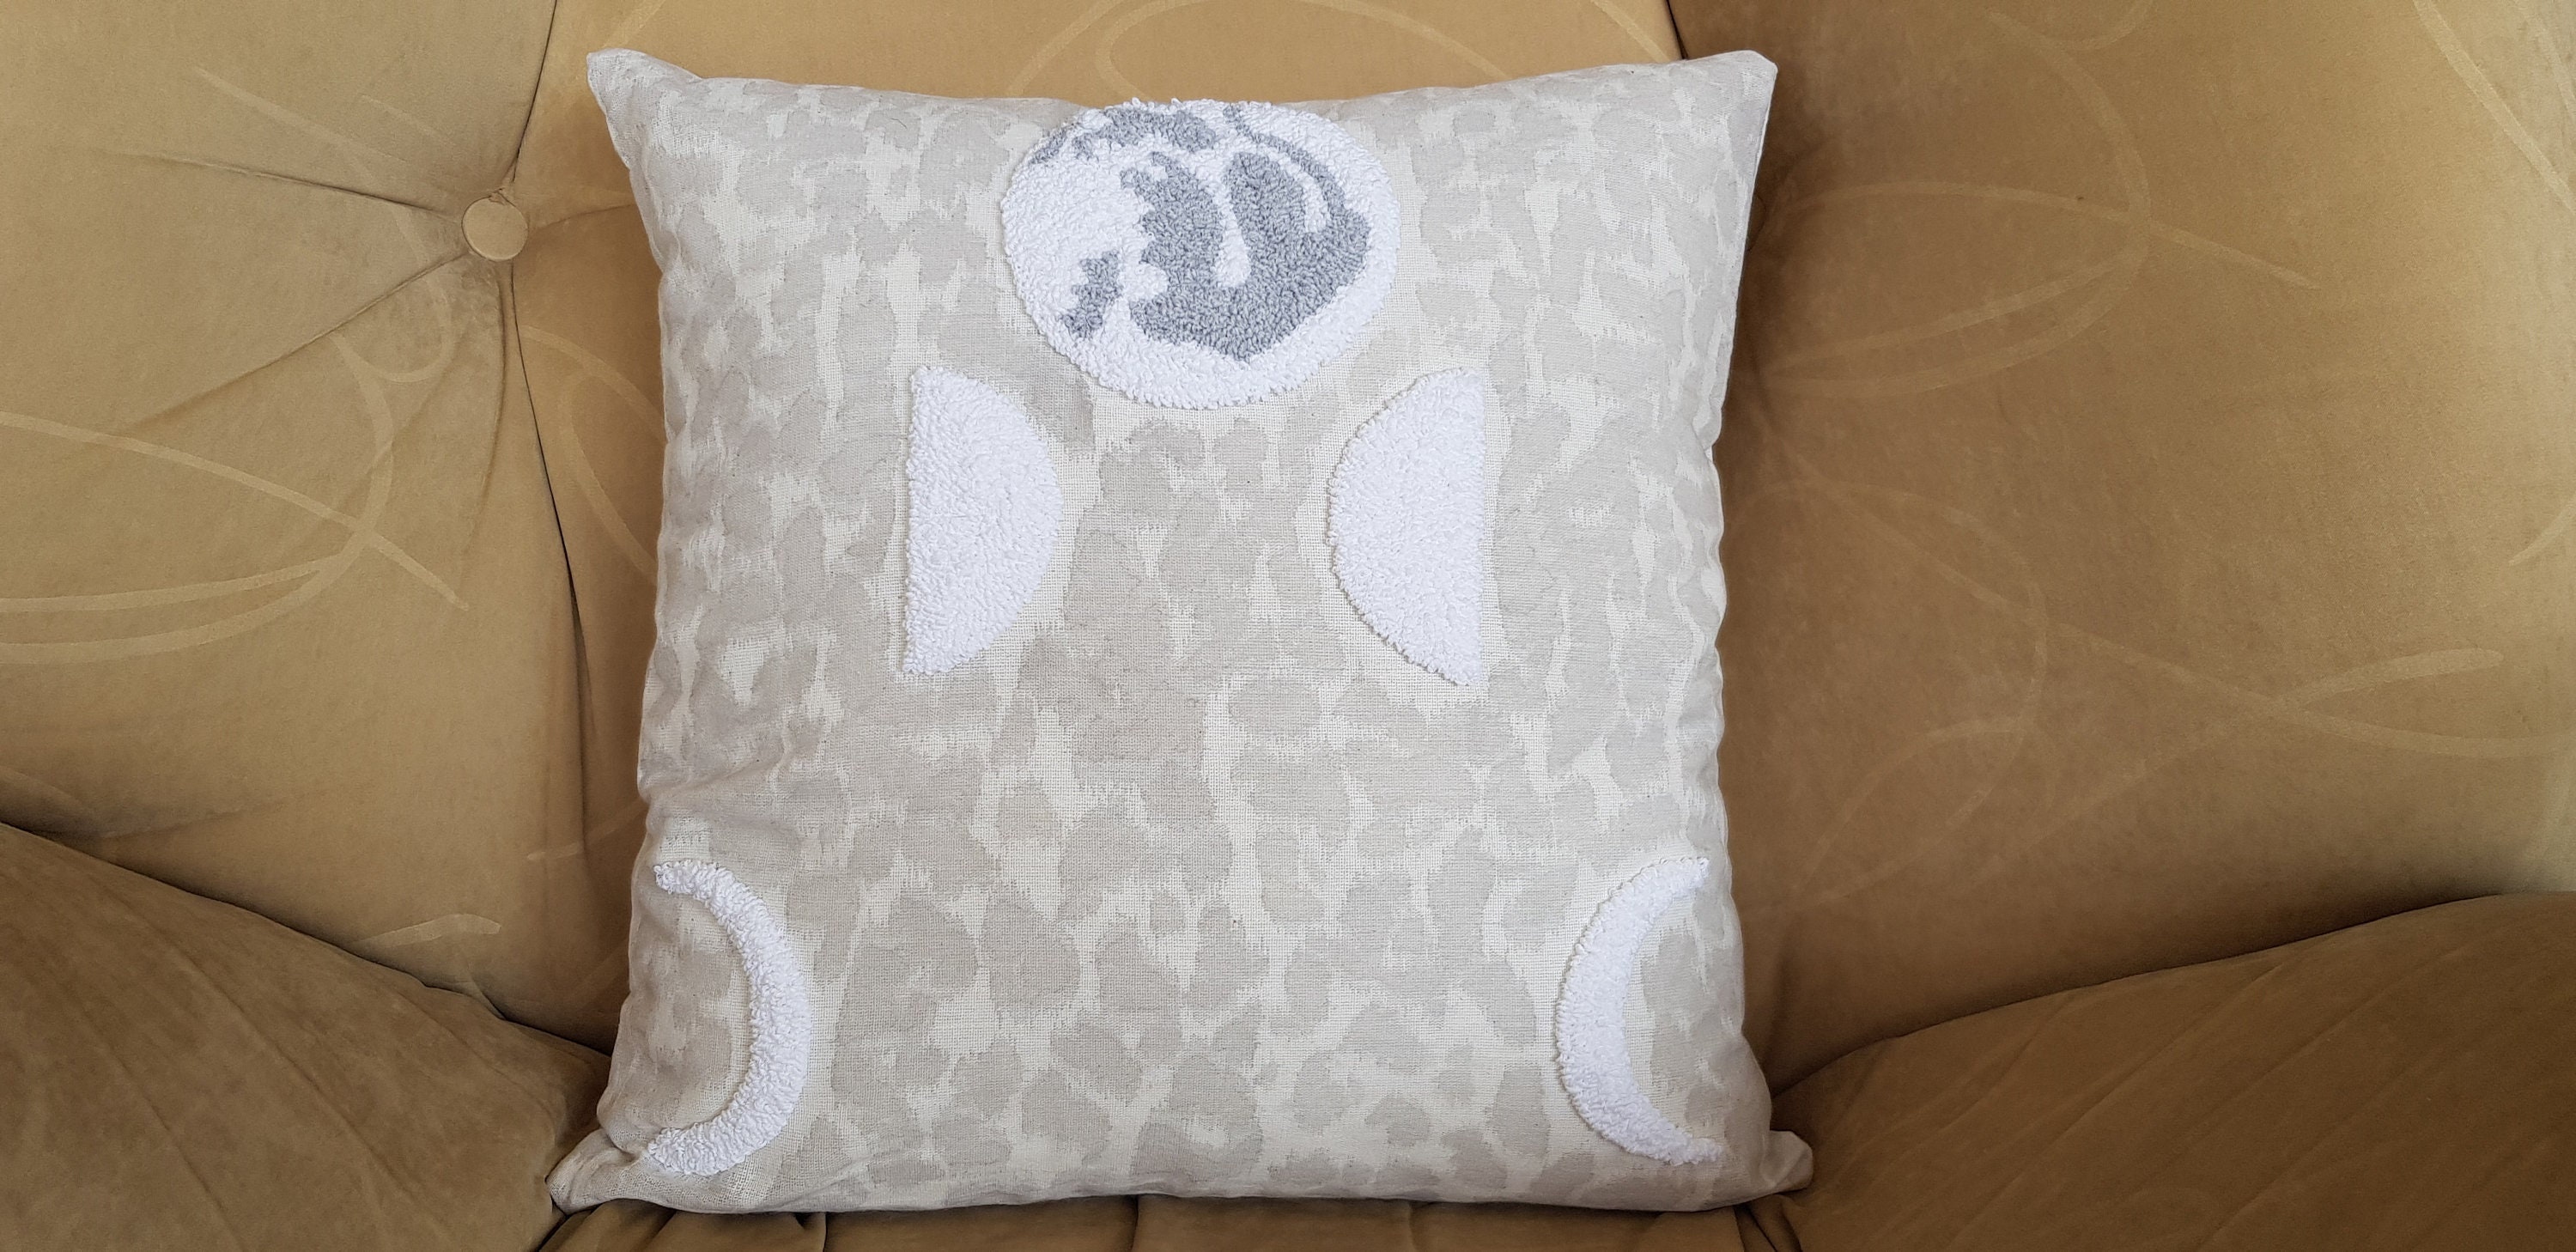 Punch Needle Embroidery Pattern Pdf, Decorative Pillow Cover Floral, I Love  You, Pillow Cushion Cover Embroidery, Gifts, Decoration 